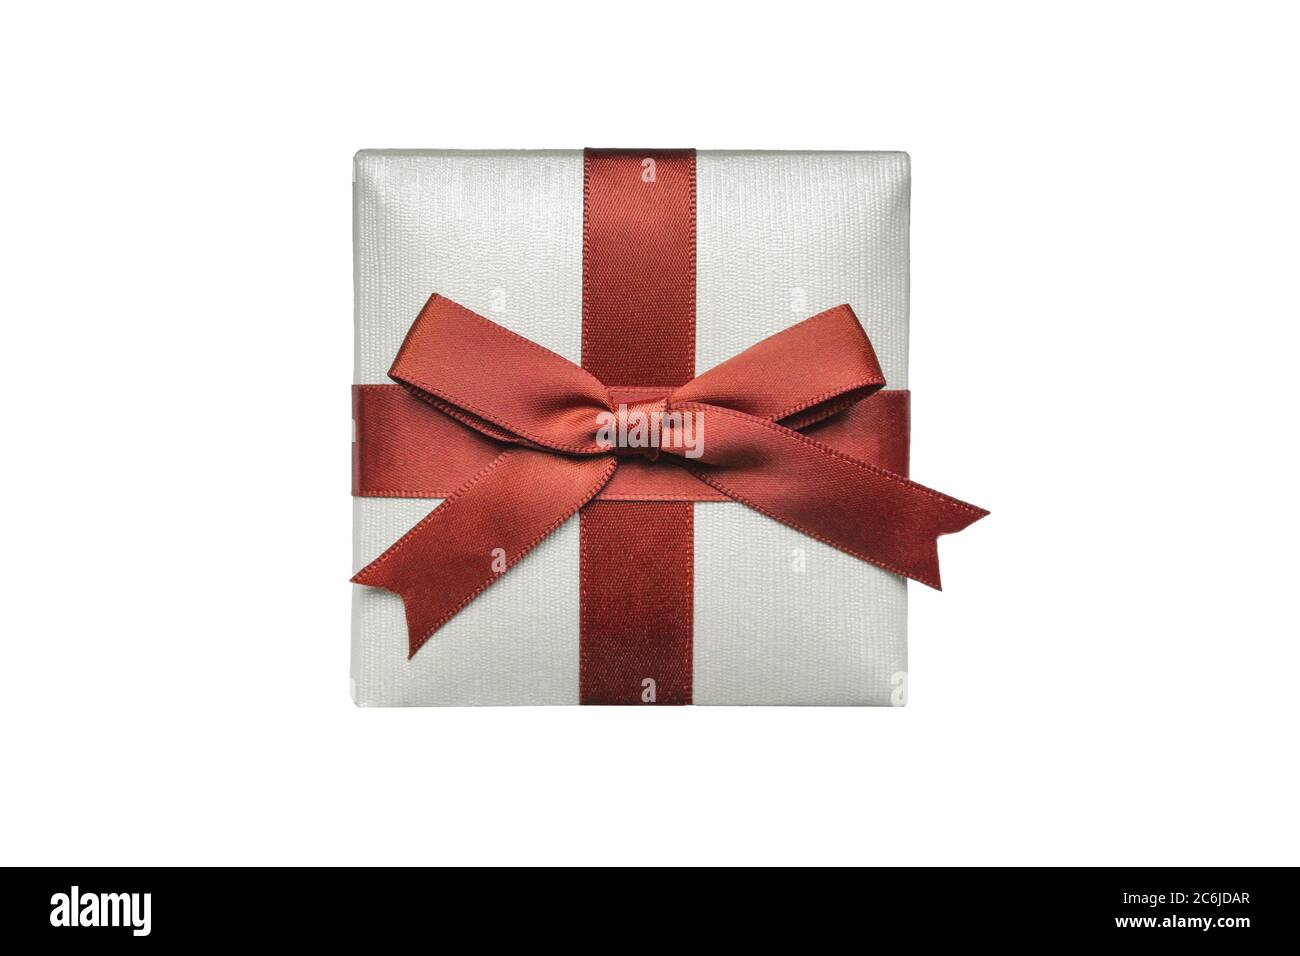 Decorative Black Gift Box With Golden Bow Isolated On White Stock  Illustration - Download Image Now - iStock